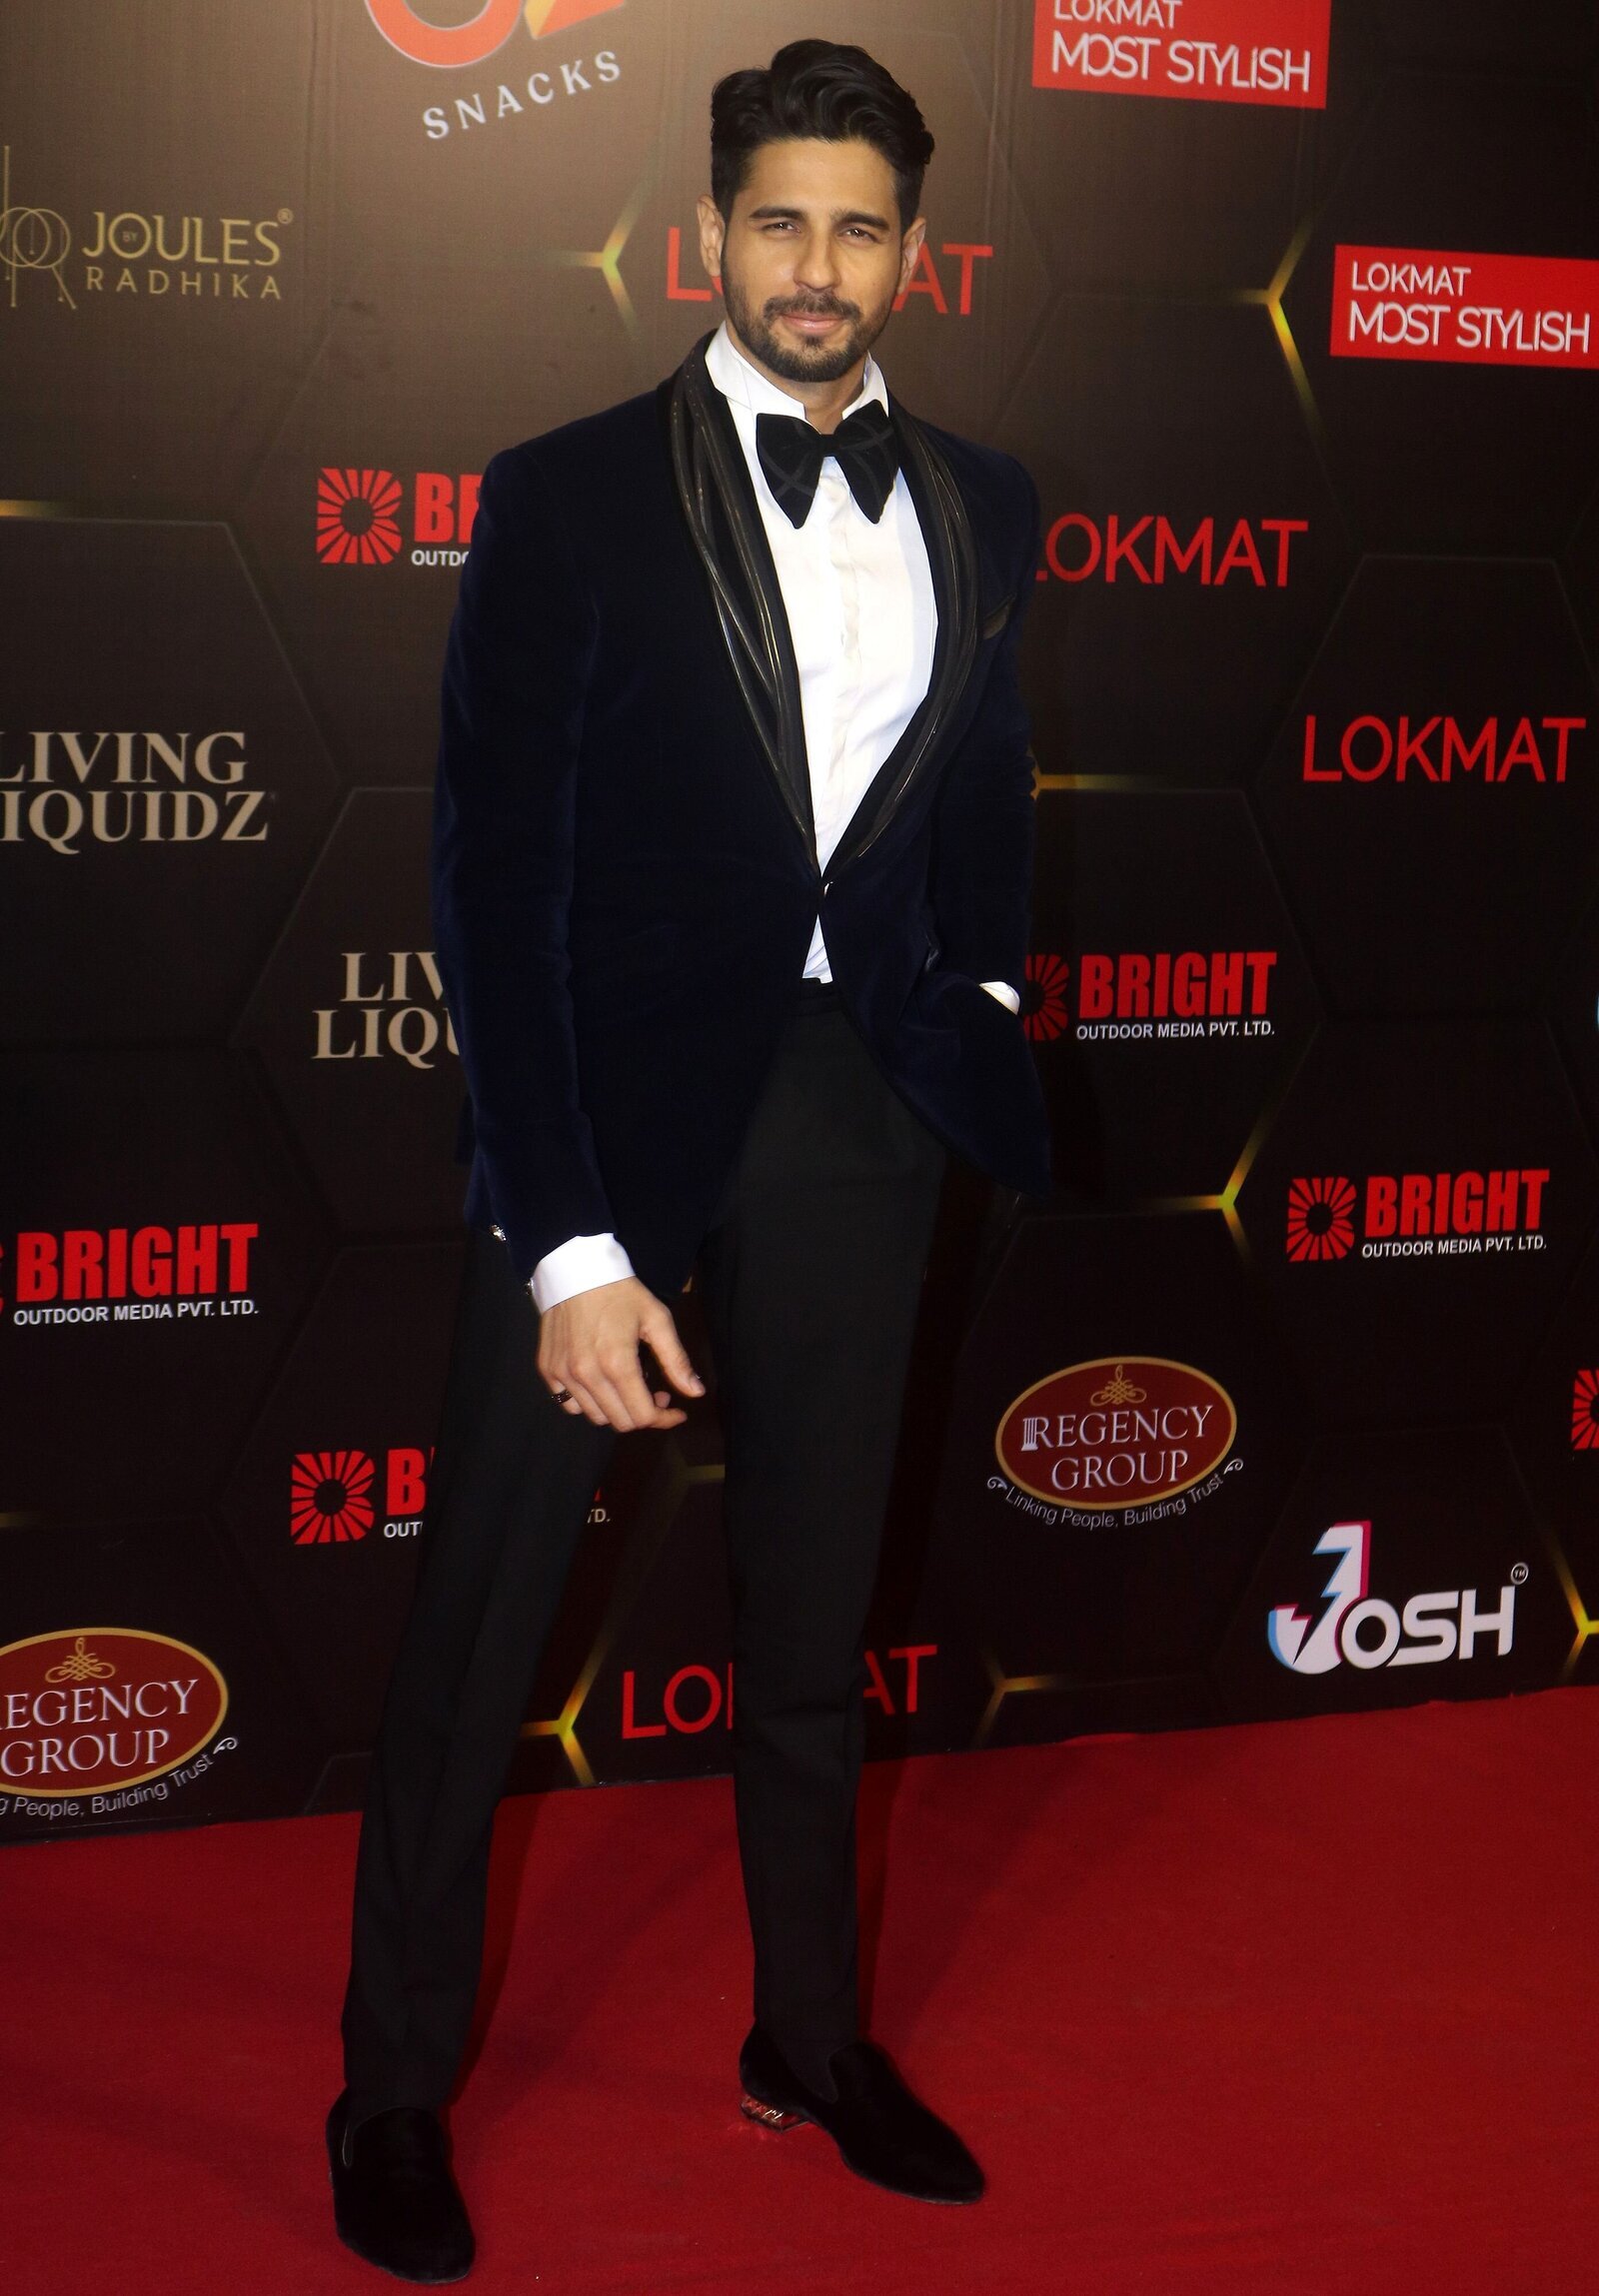 Sidharth Malhotra - Photos: Celebs At The Lokmat Most Stylish Awards 2021 | Picture 1845753